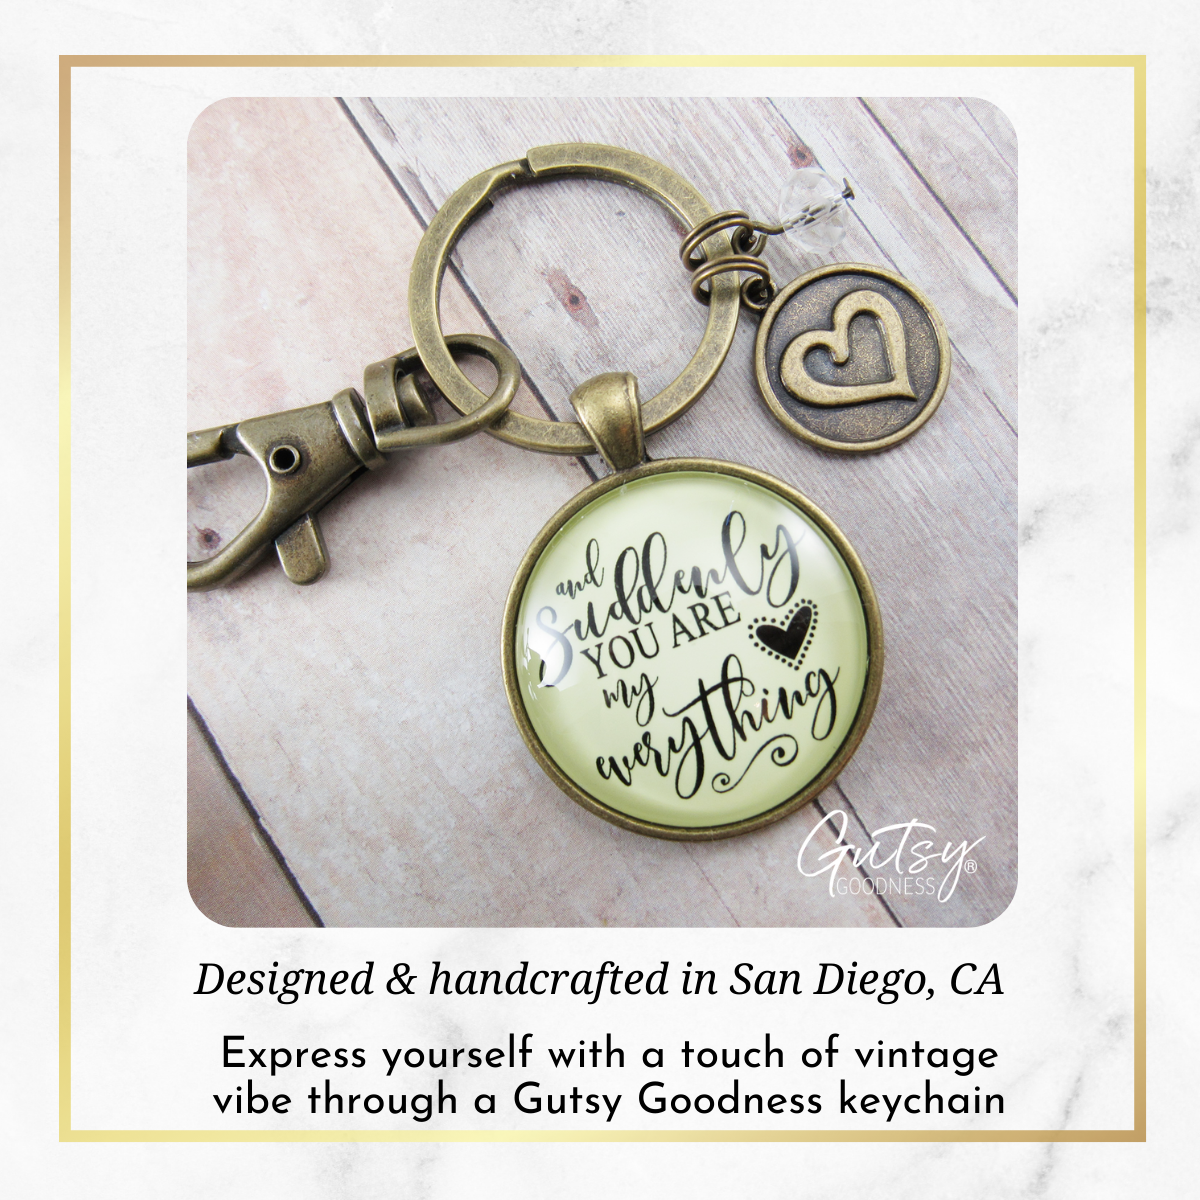 First Mother's Day Keychain And Suddenly You Are My Everything Rustic Mom Jewelry Heart - Gutsy Goodness Handmade Jewelry;First Mother's Day Keychain And Suddenly You Are My Everything Rustic Mom Jewelry Heart - Gutsy Goodness Handmade Jewelry Gifts